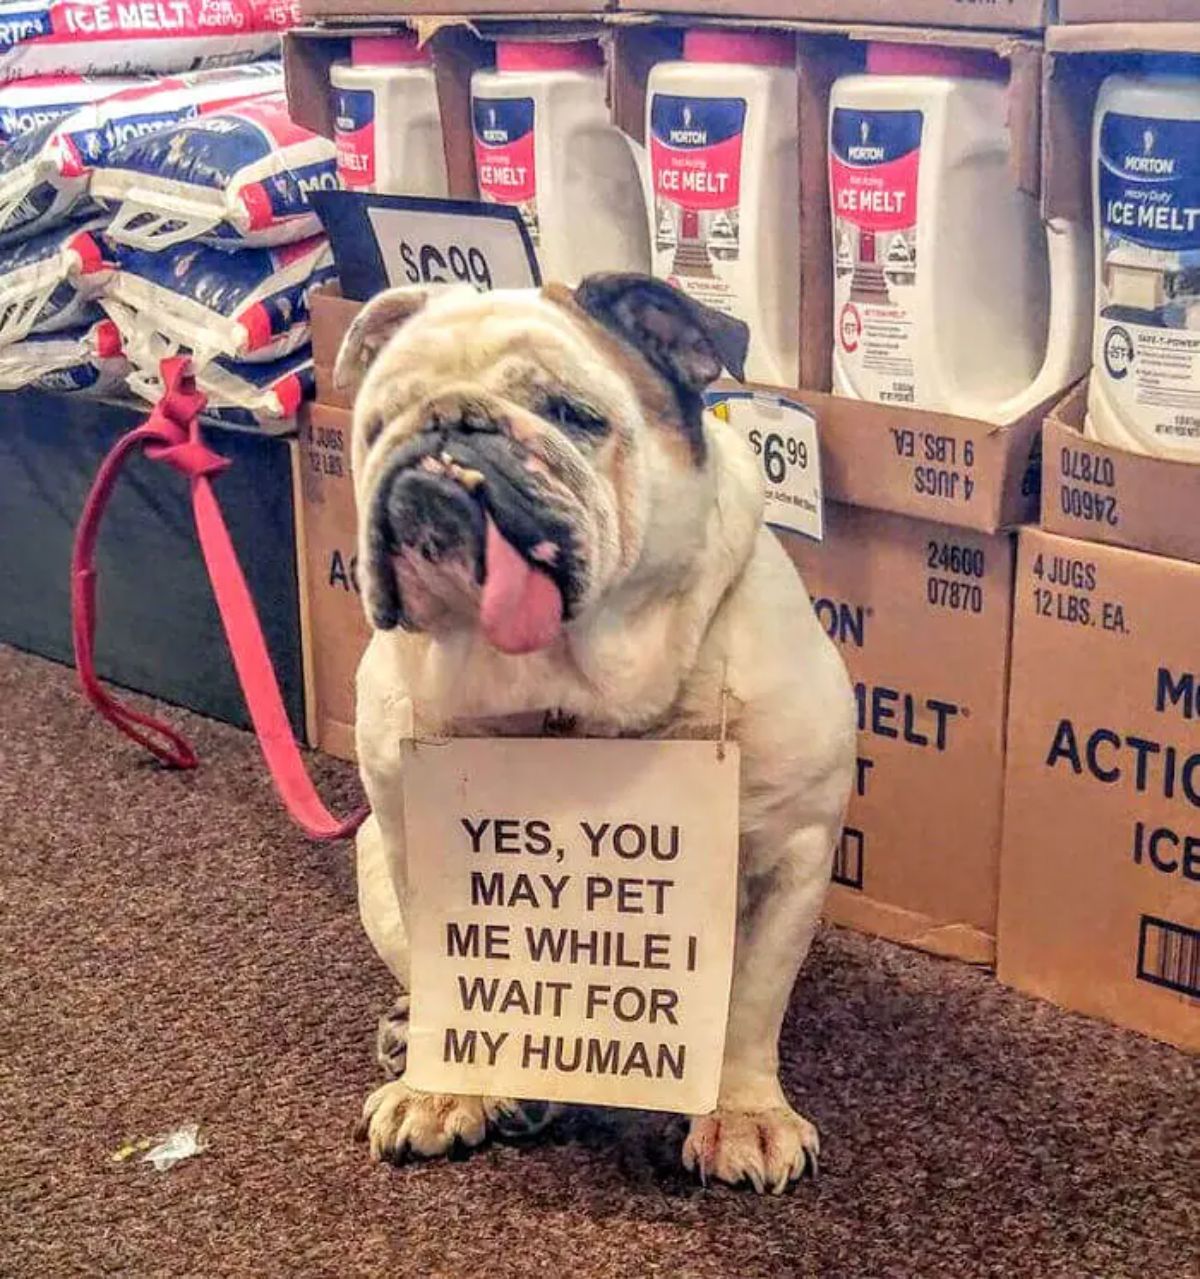 white and brown bulldog with pink leash tied to a sack of flour sitting with a note saying people can the dog while it waits for its human